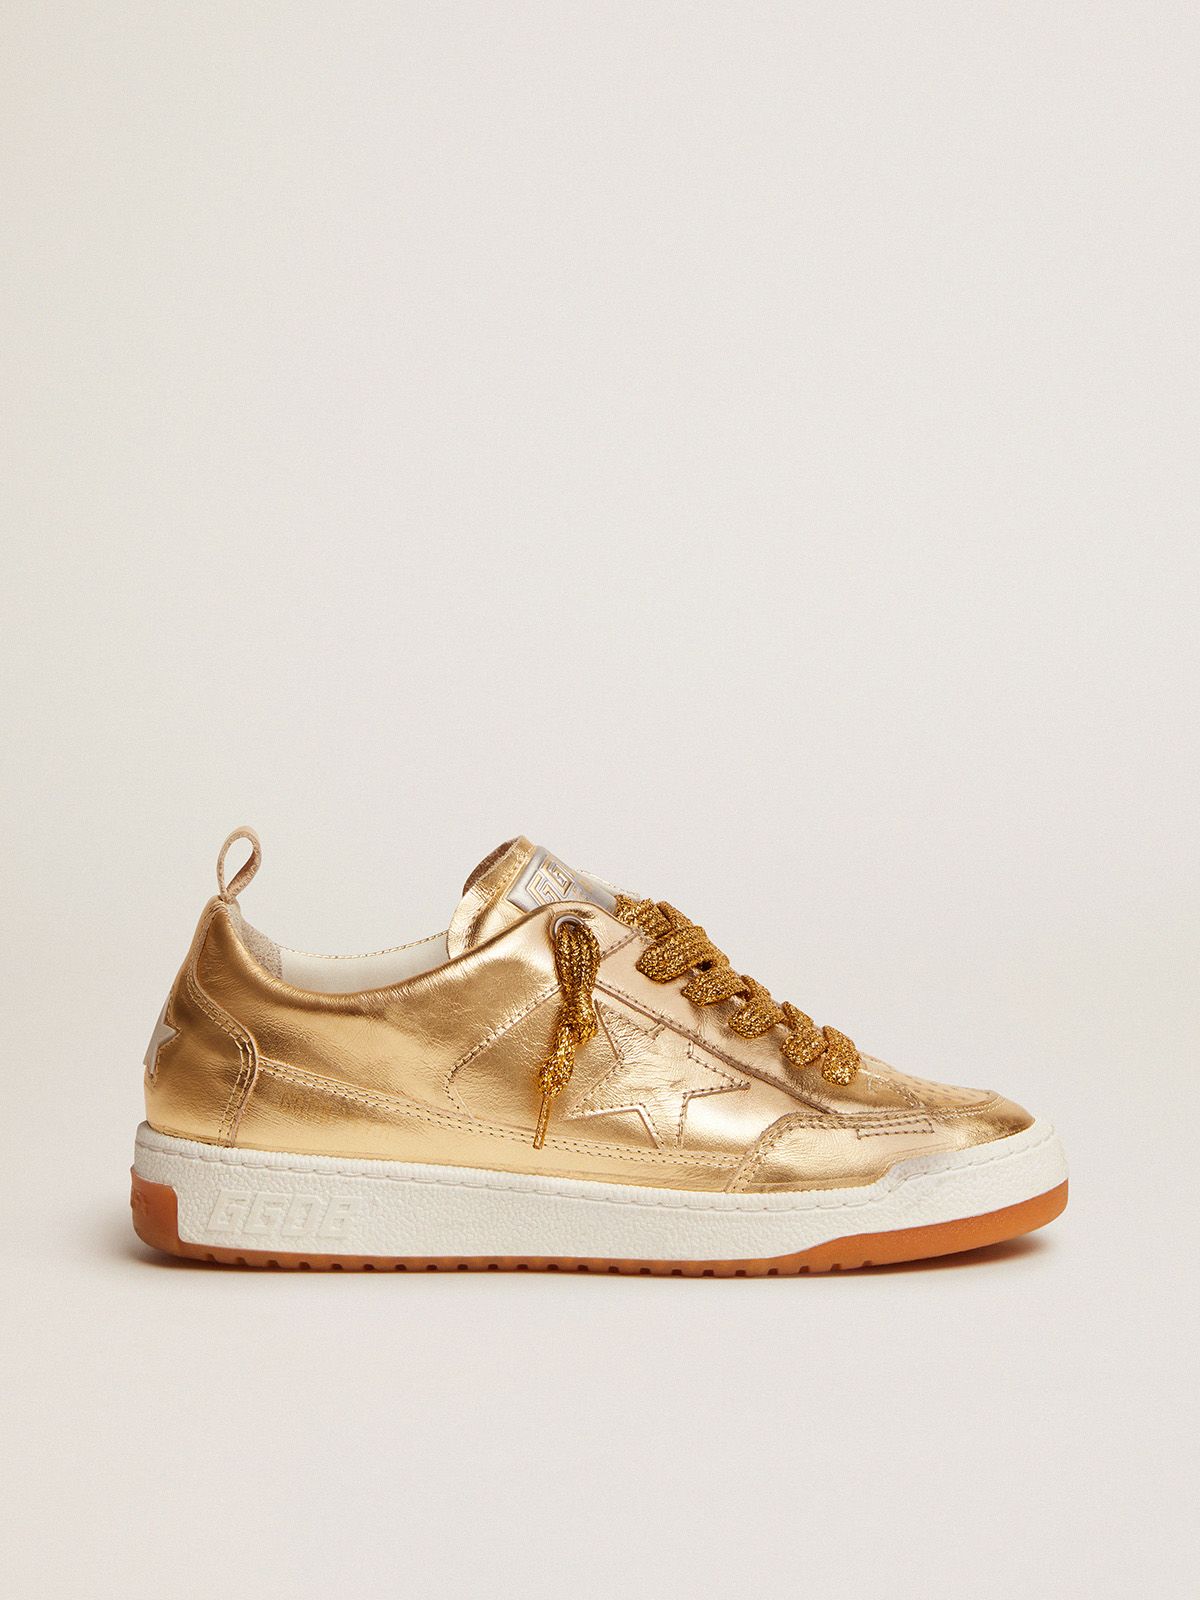 golden goose Yeah laminated in gold leather sneakers